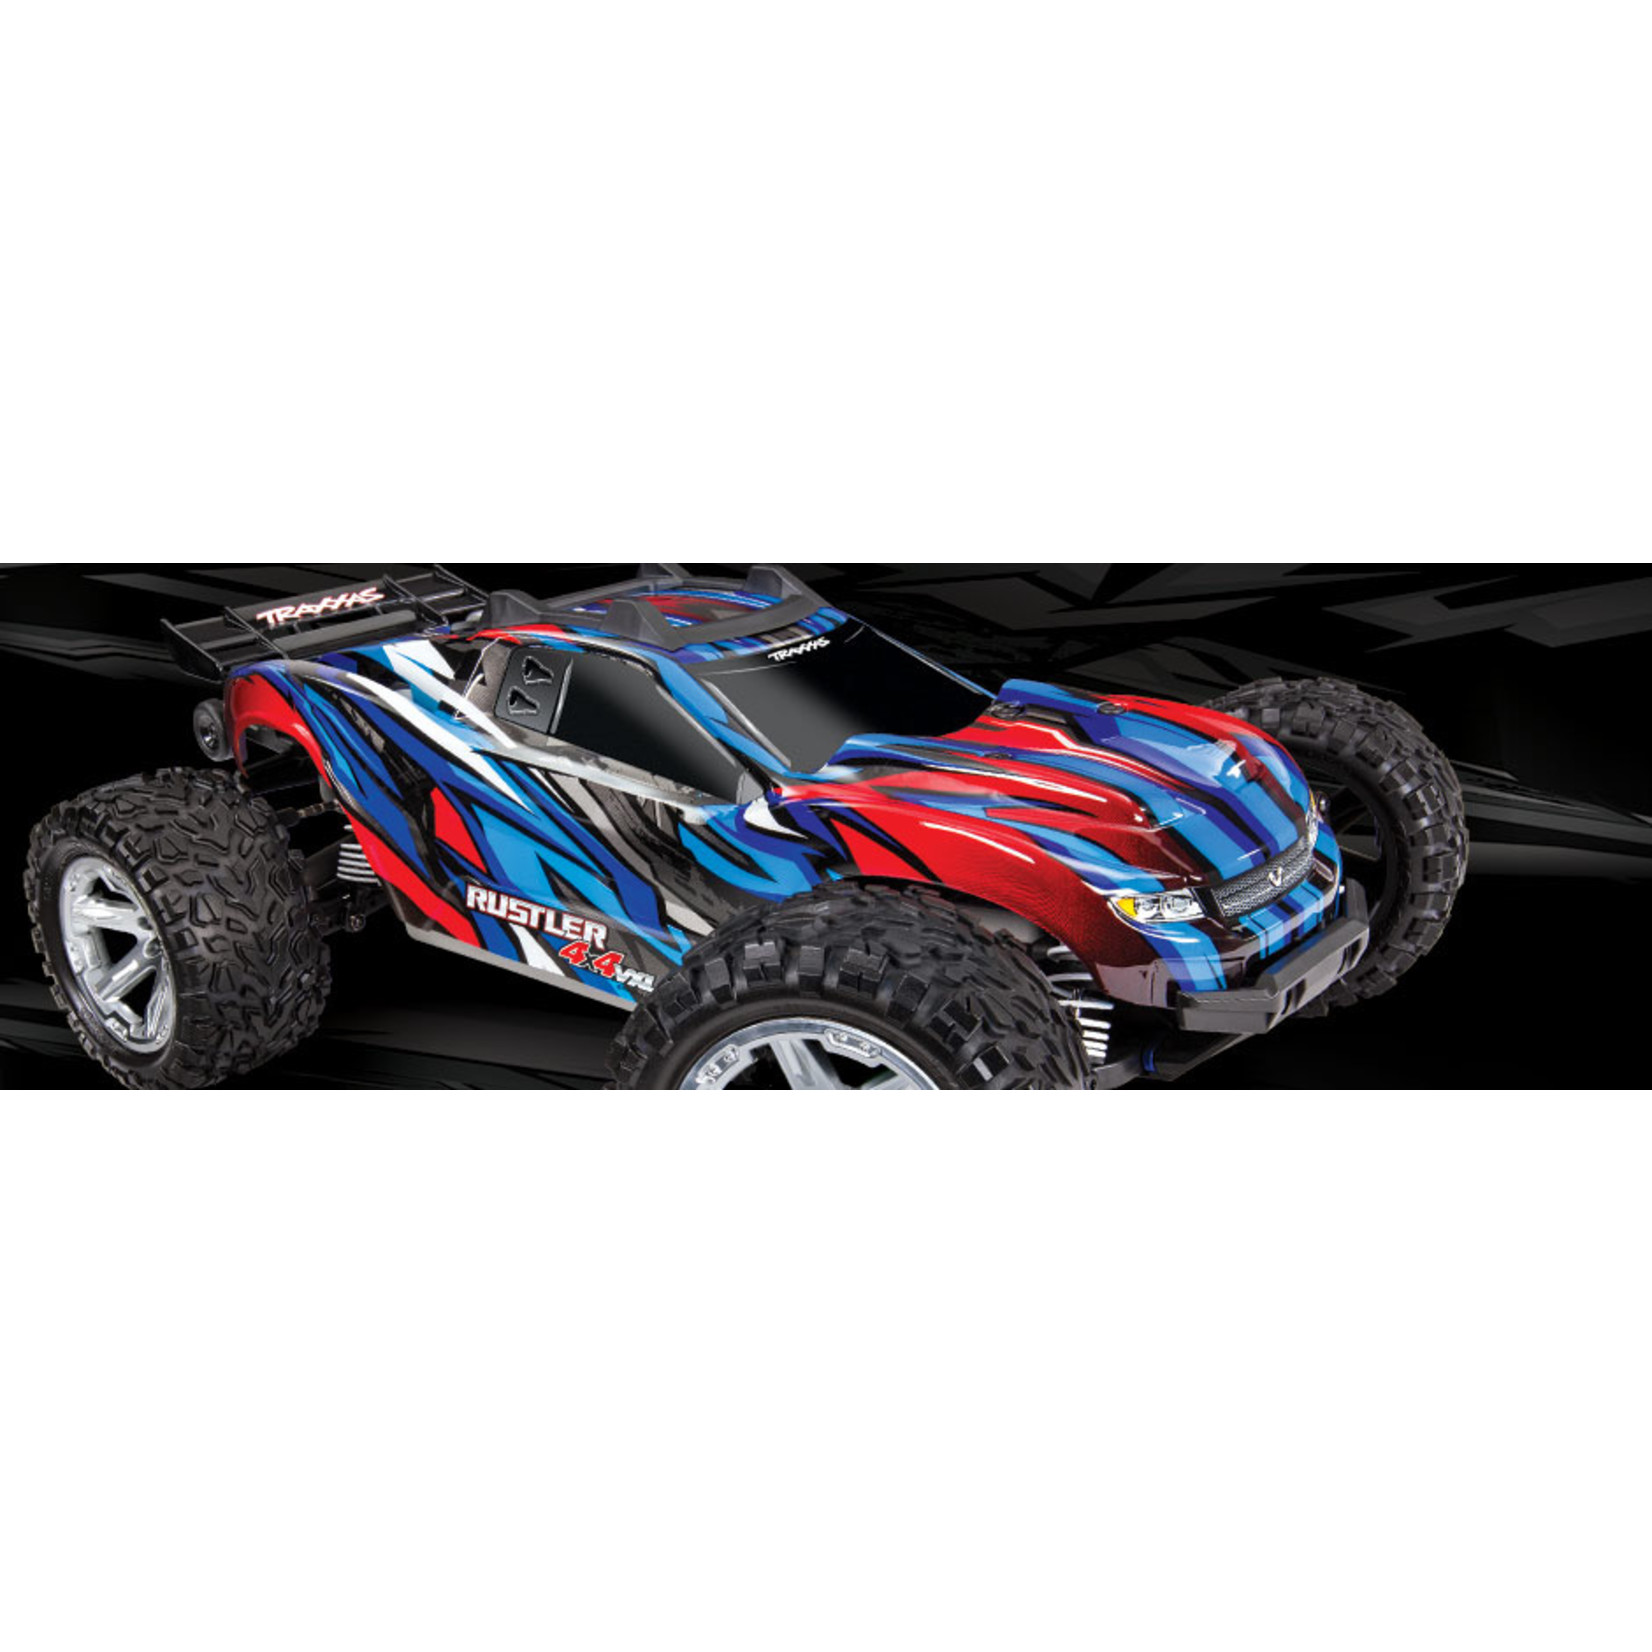 Traxxas 67076-4-BLUE Rustler® 4X4 VXL:  1/10 Scale Stadium Truck with TQi™ Traxxas Link™ Enabled 2.4GHz Radio System & Traxxas Stability Management (TSM)®